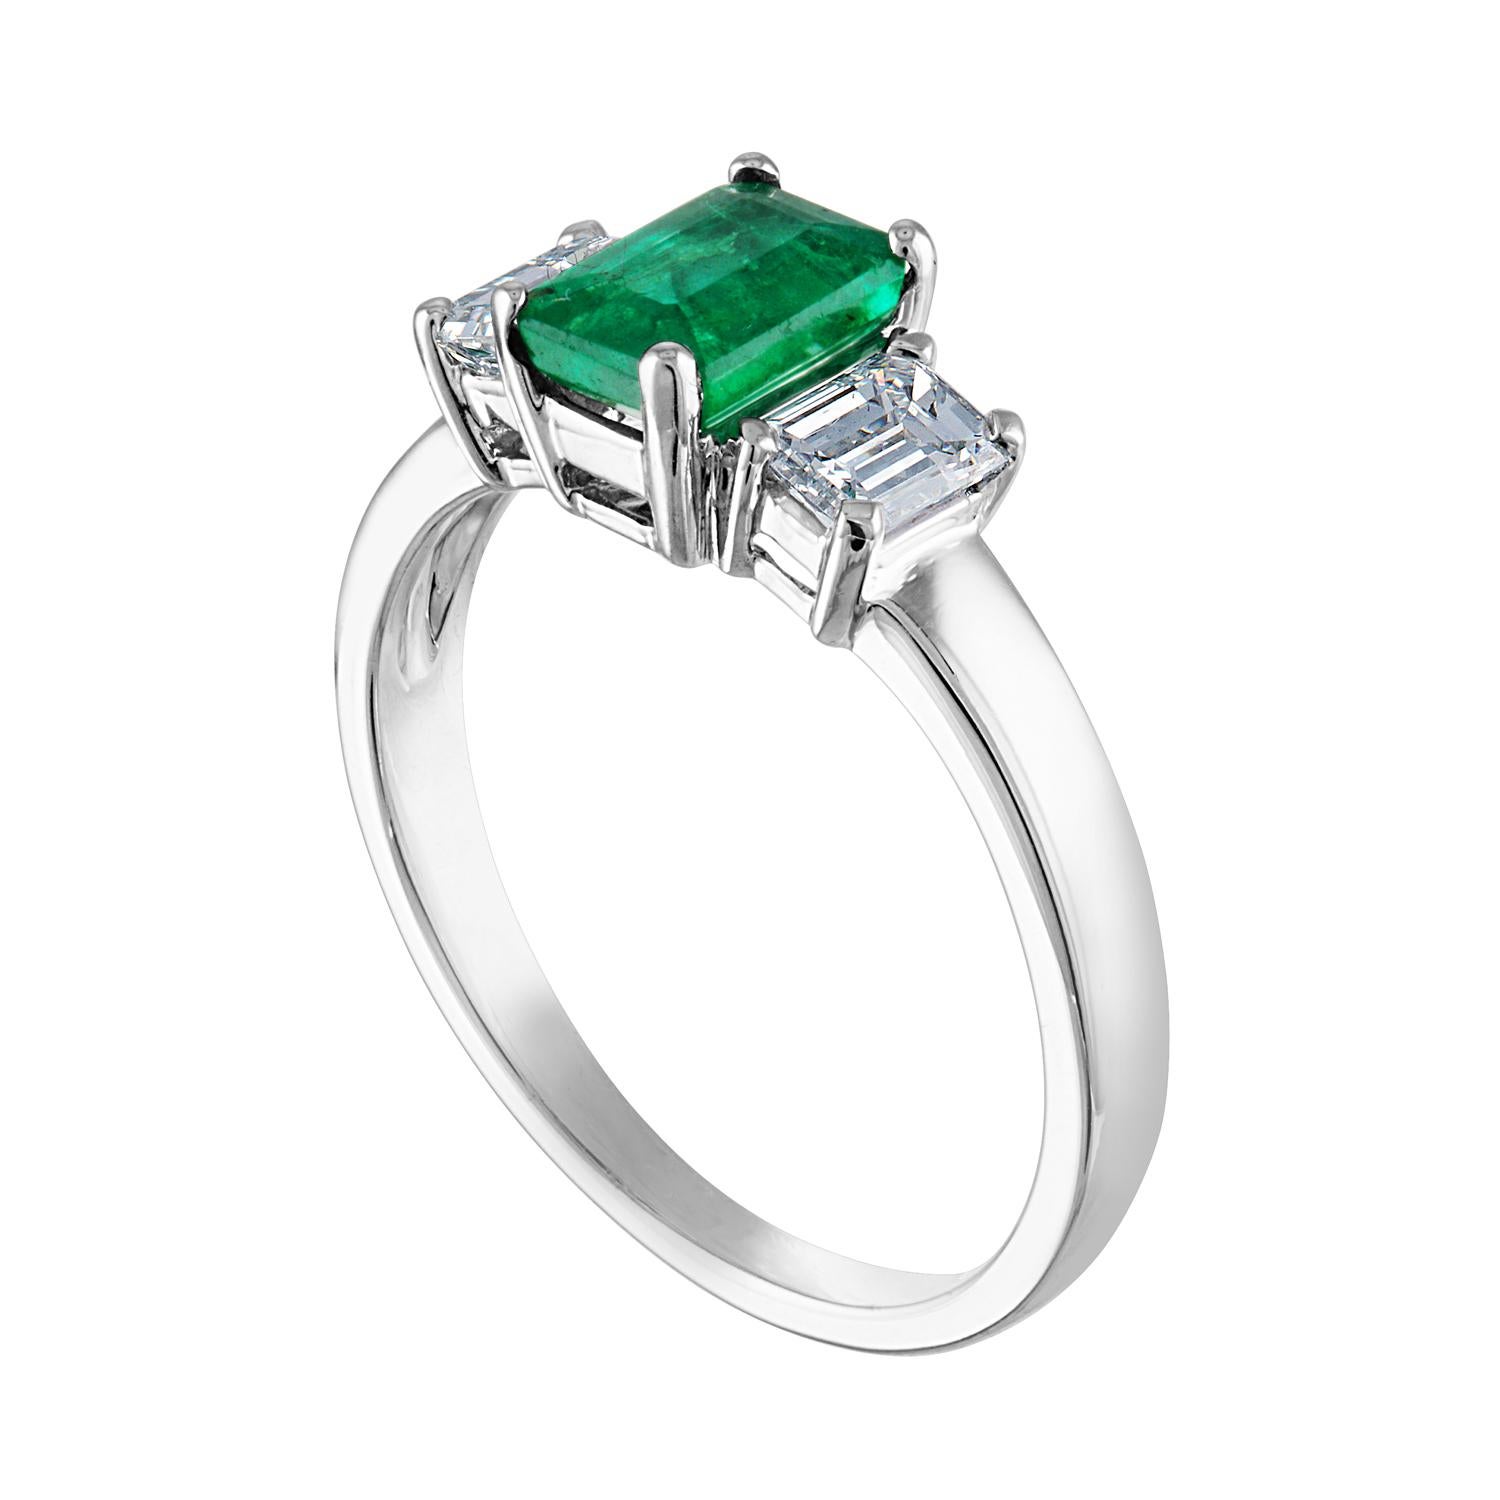 Beautiful 3 Stone Emerald Ring
The ring is 18K White Gold.
The Center is a beautiful emerald cut 0.84 Carat Emerald.
The Emerald is AGL certified.
There are 2 side stones 0.64 Carats Diamonds F/G VS/SI
The ring is a size 6.75, sizable.
The ring